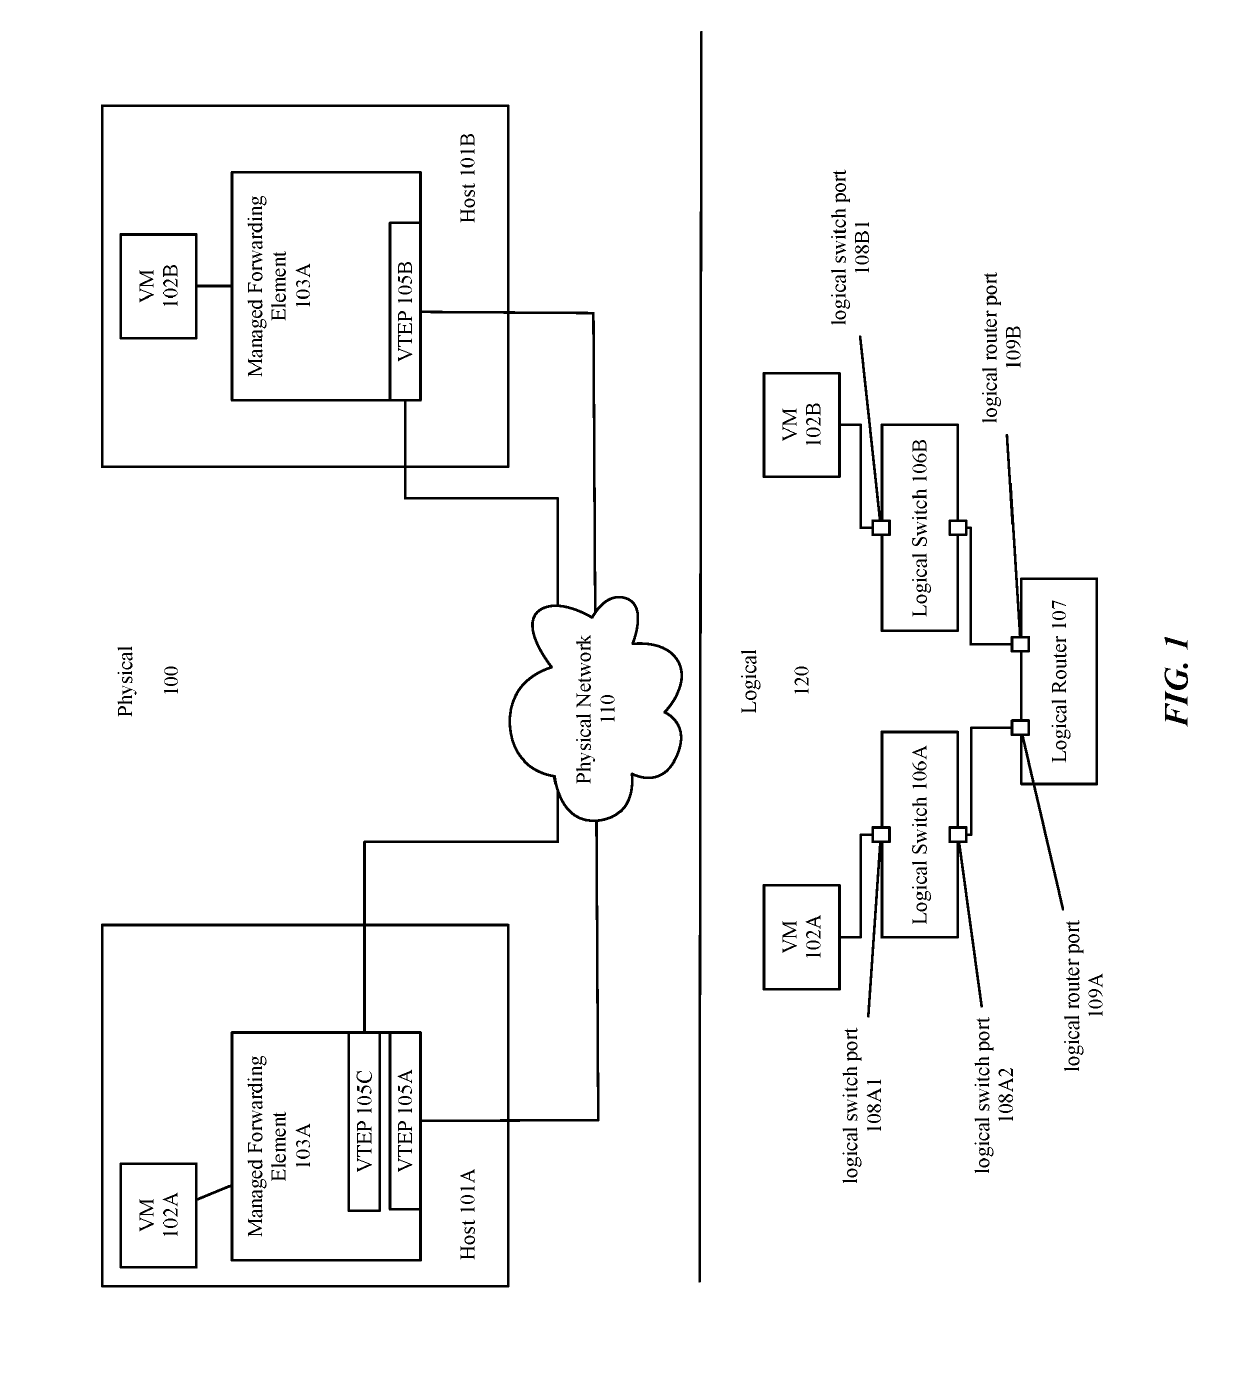 Defining routing domain for distributed packet processing